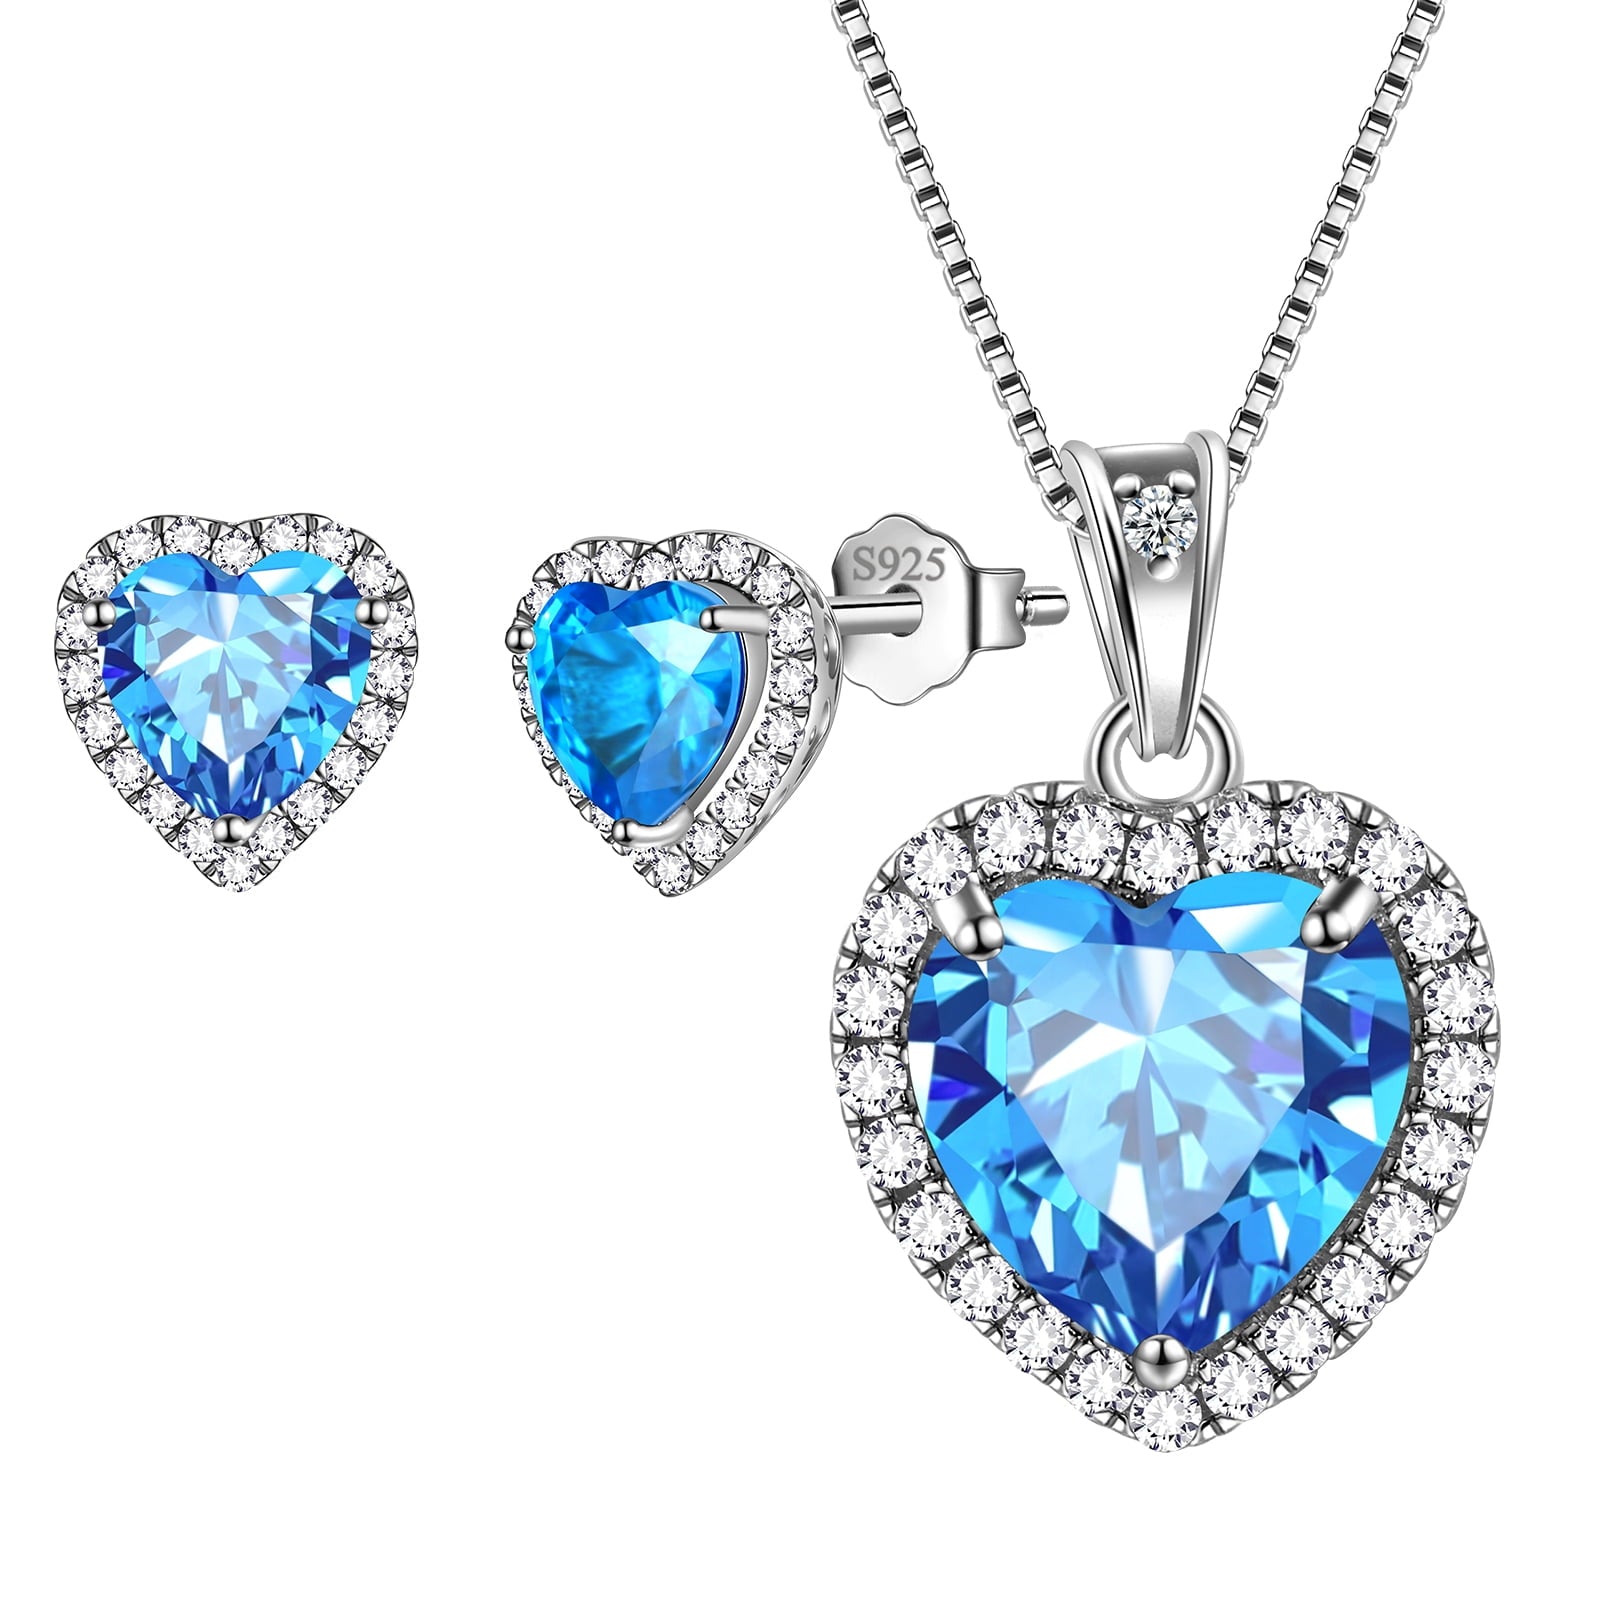 Blue Heart Jewelry Sets for Women, Aquamarine March Birthstone Jewelry Set Necklace Earrings 925 Sterling Silver Jewelry Girls Birthday Valentine's Day Gifts